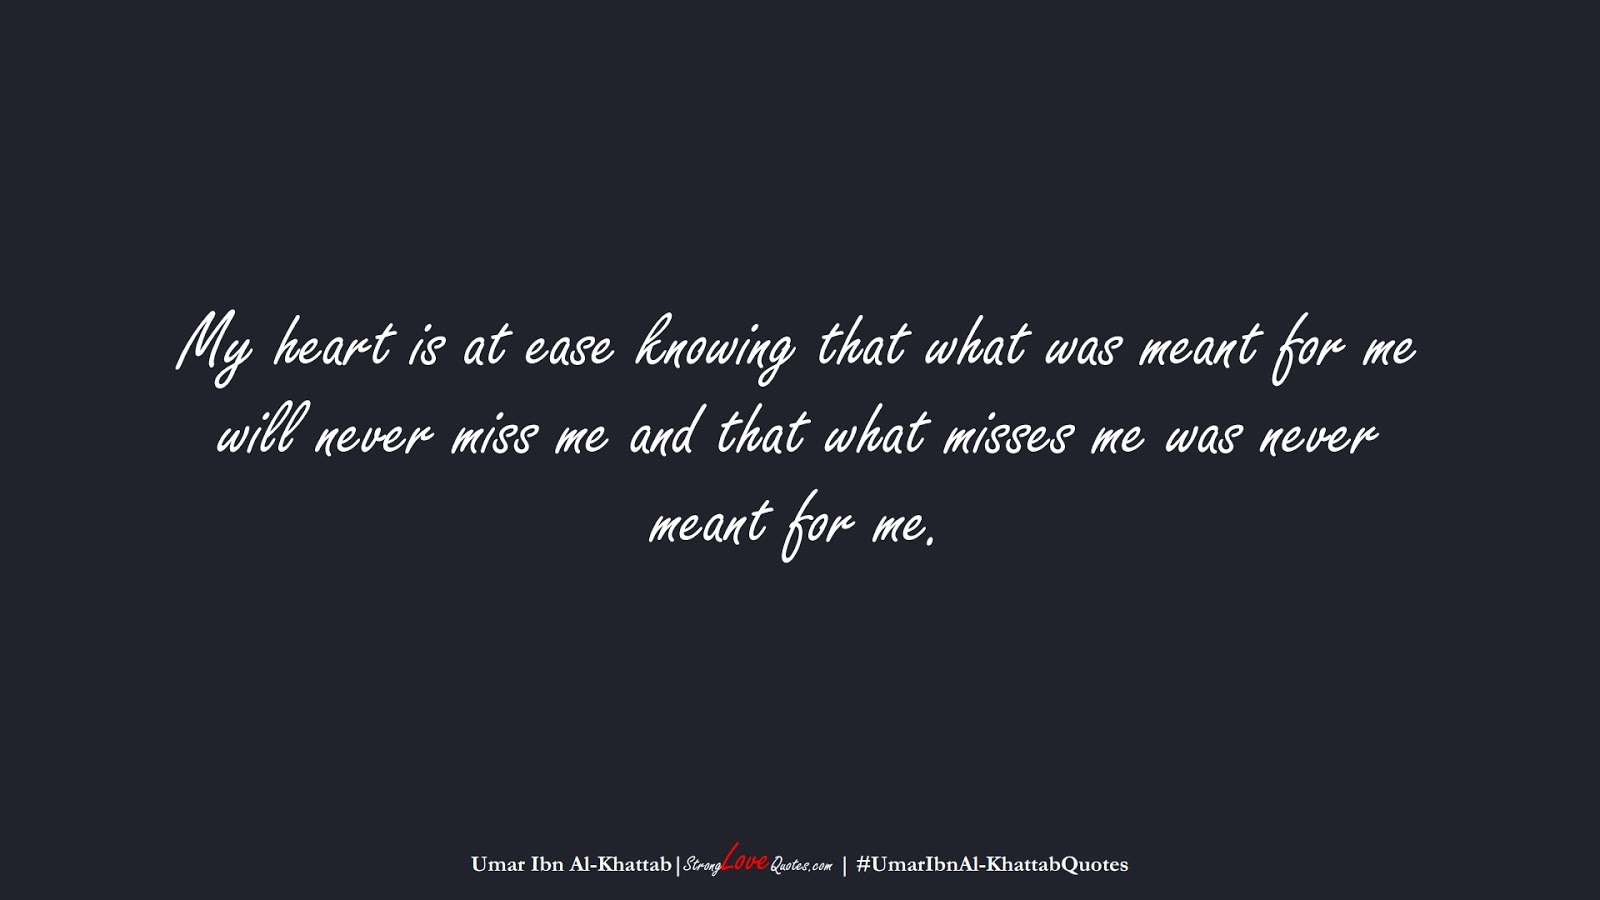 My heart is at ease knowing that what was meant for me will never miss me and that what misses me was never meant for me. (Umar Ibn Al-Khattab);  #UmarIbnAl-KhattabQuotes